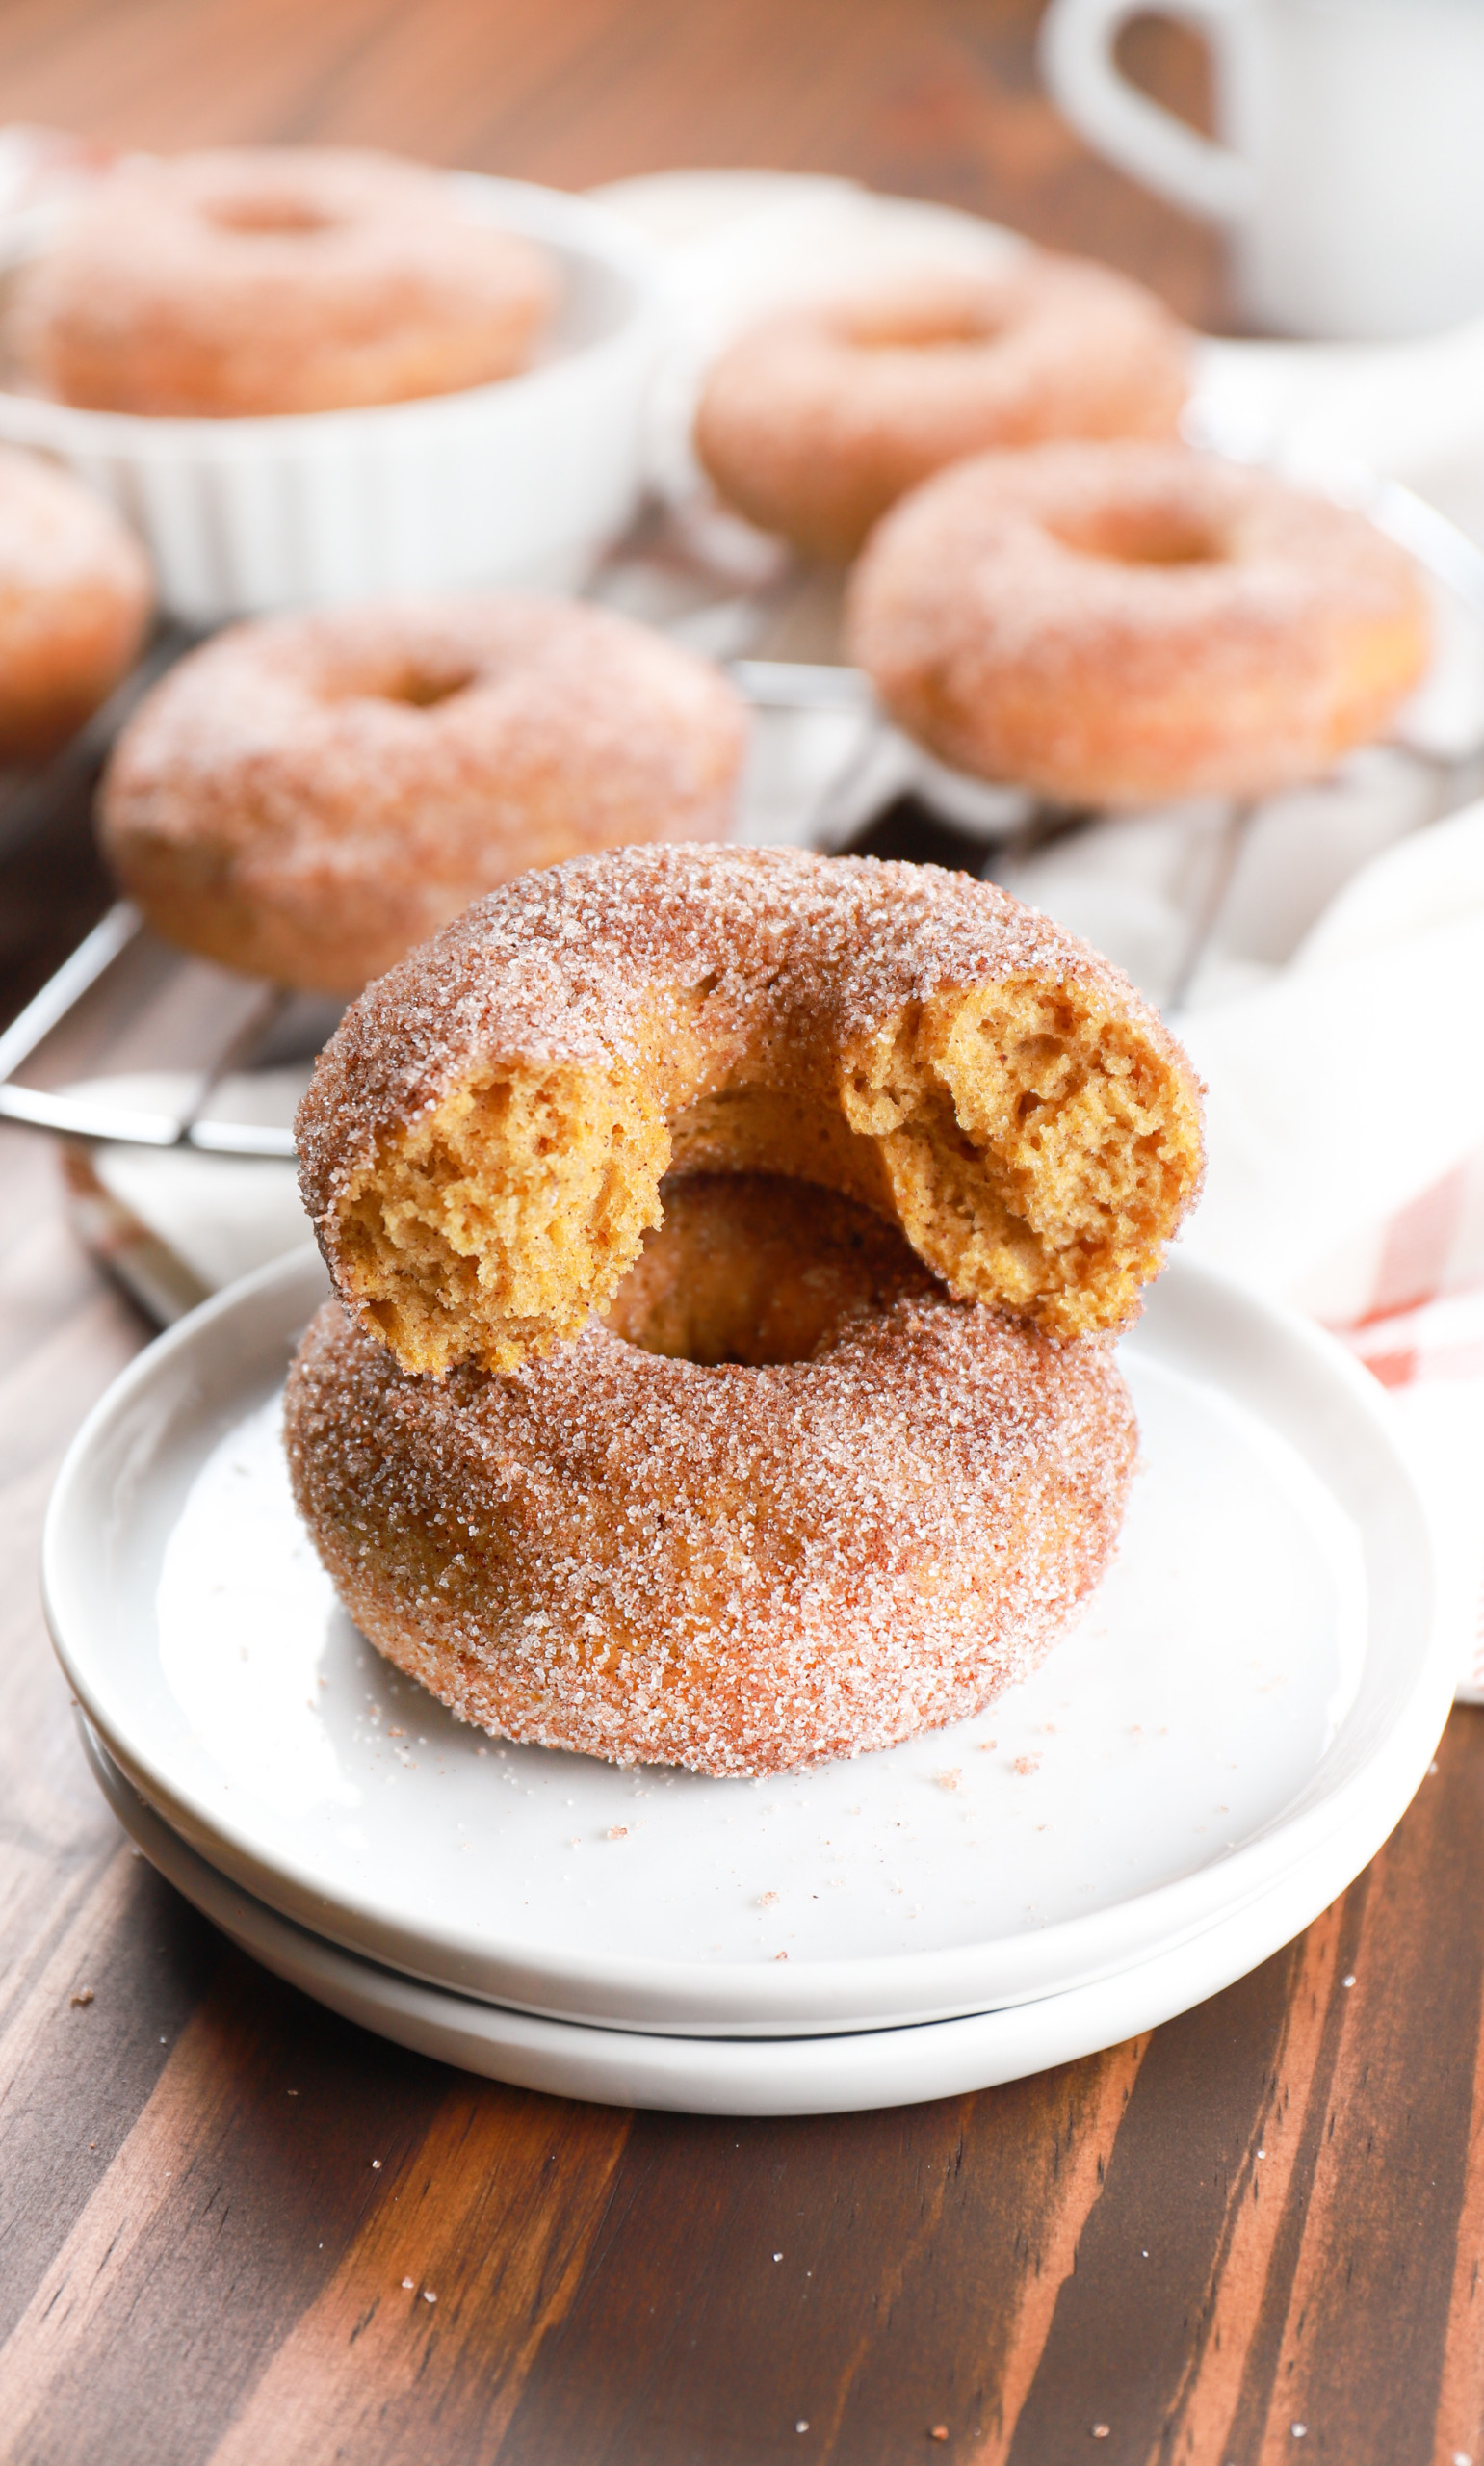 A baked cinnamon sugar pumpkin donut that is broken in half sitting on top of another donut all on a small white plate.